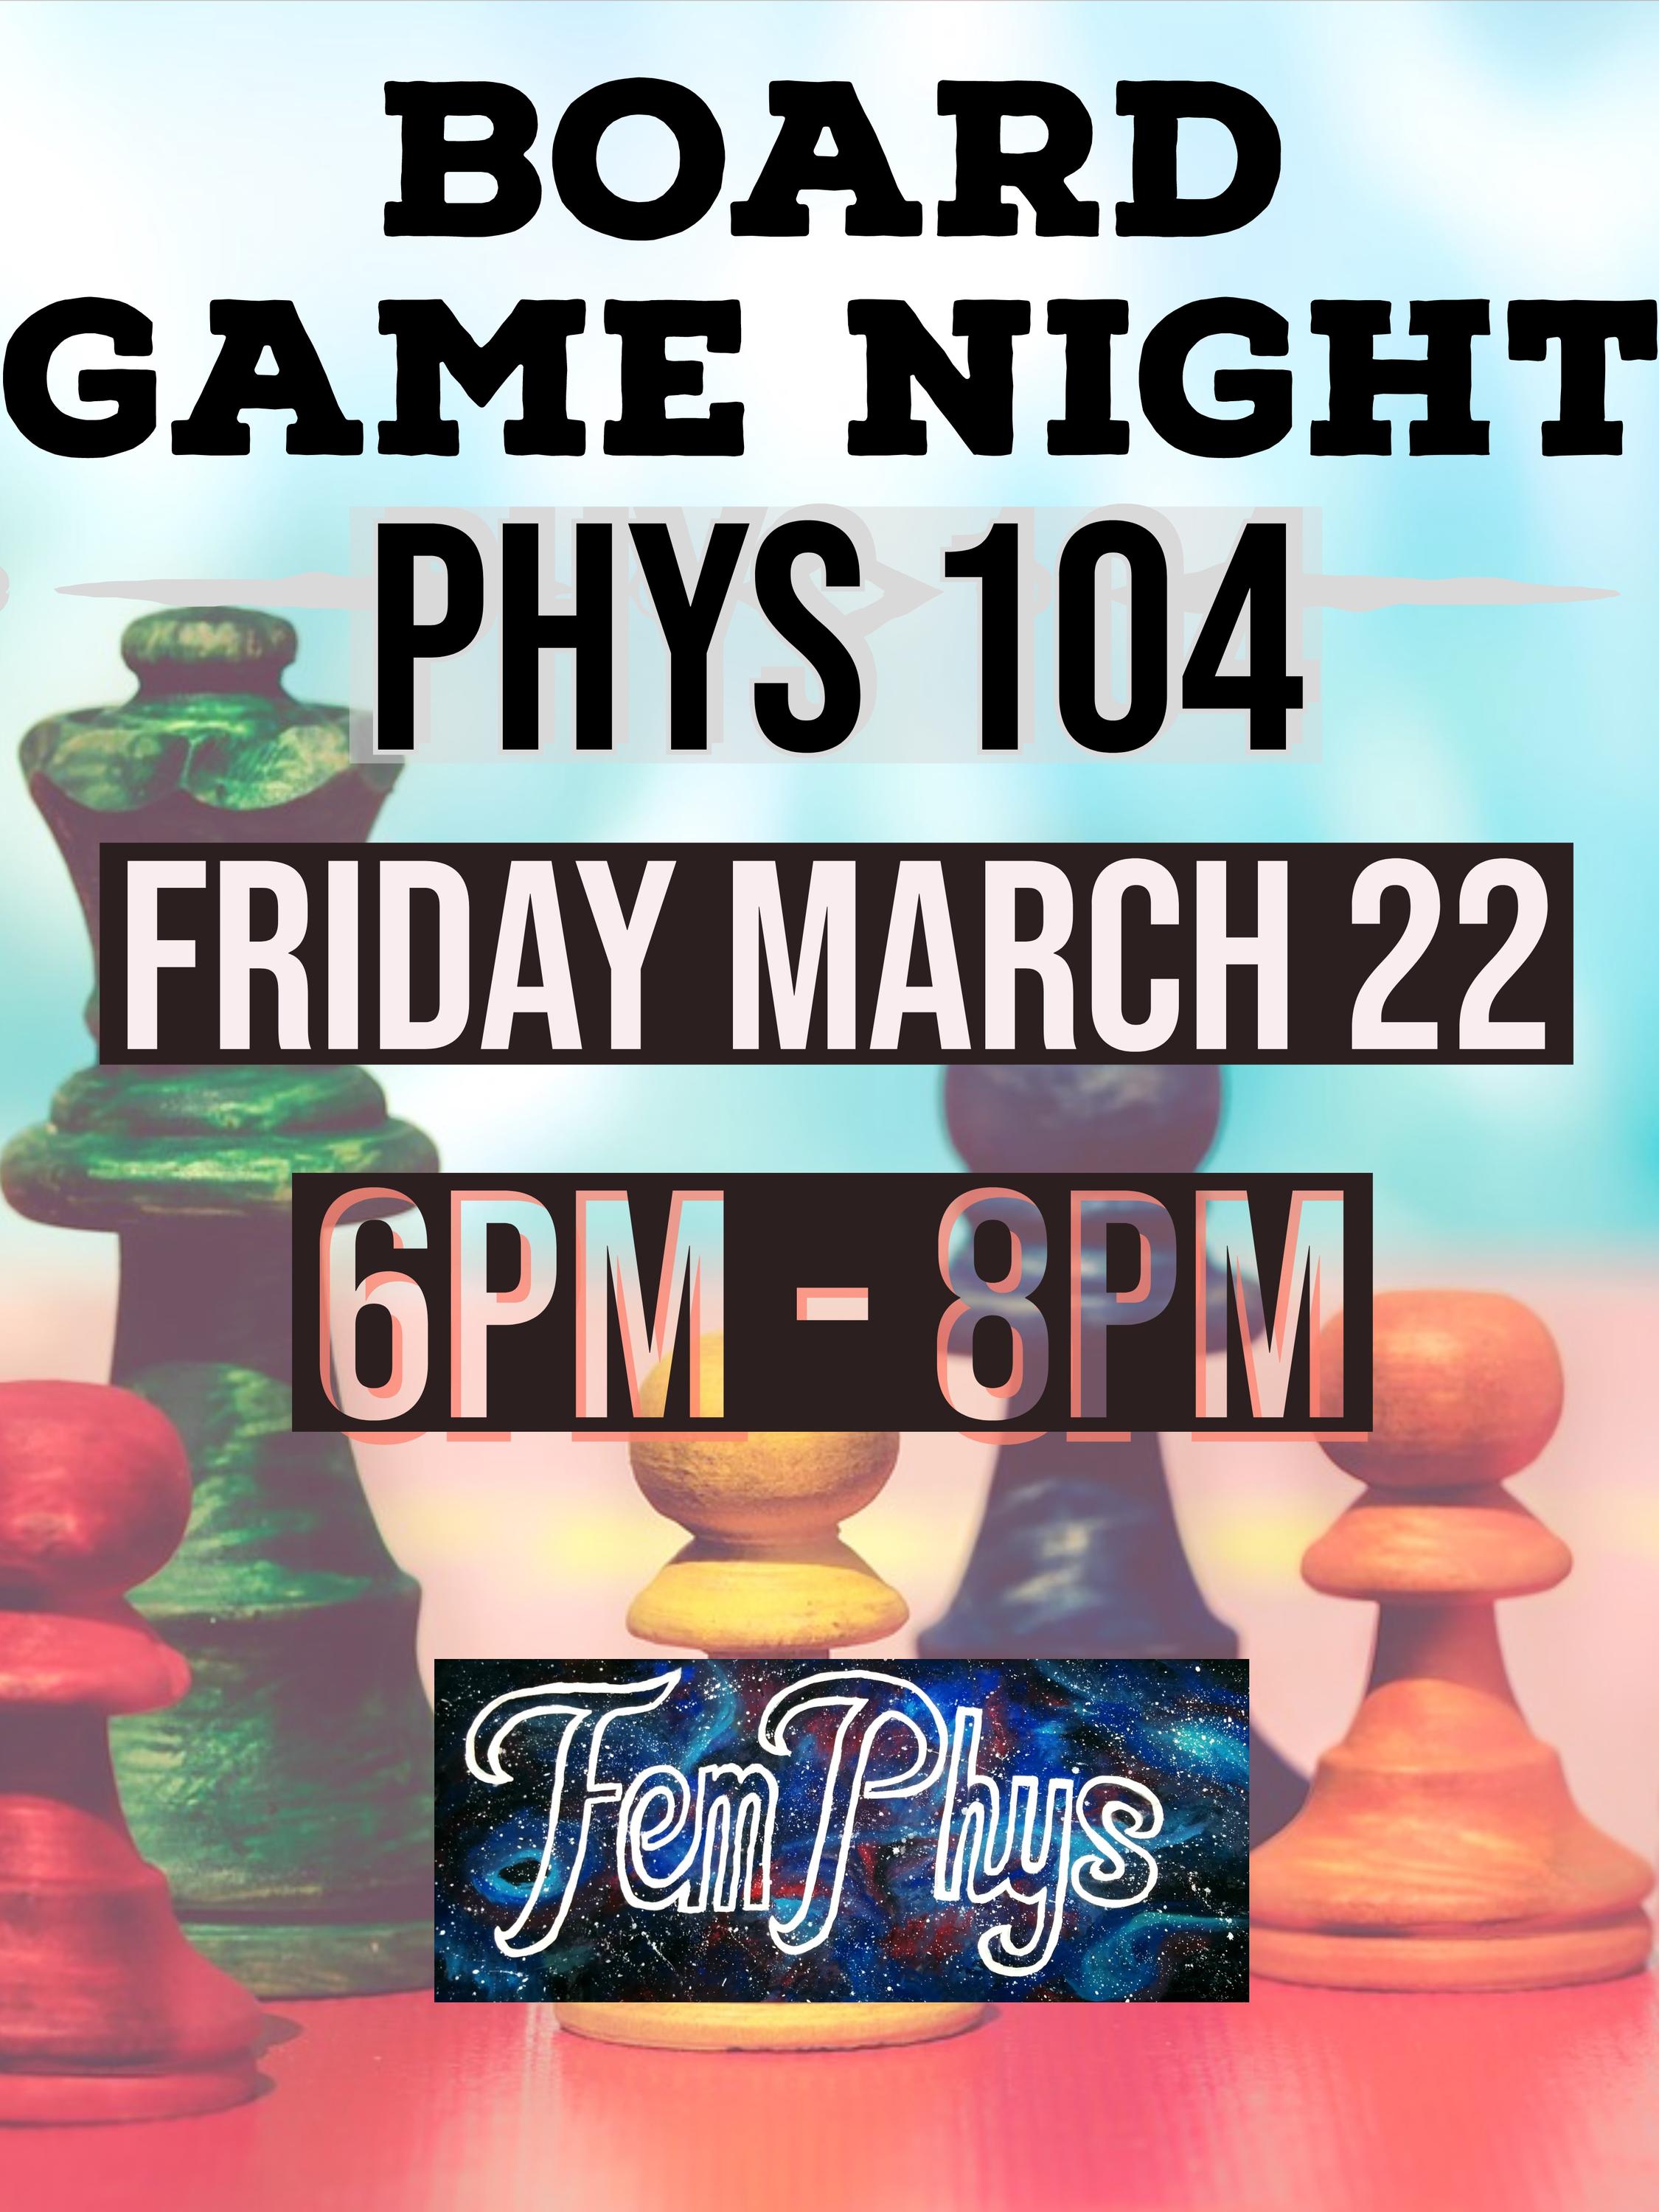 Board Game Night Friday March 22 6-8 pm in Phys 104